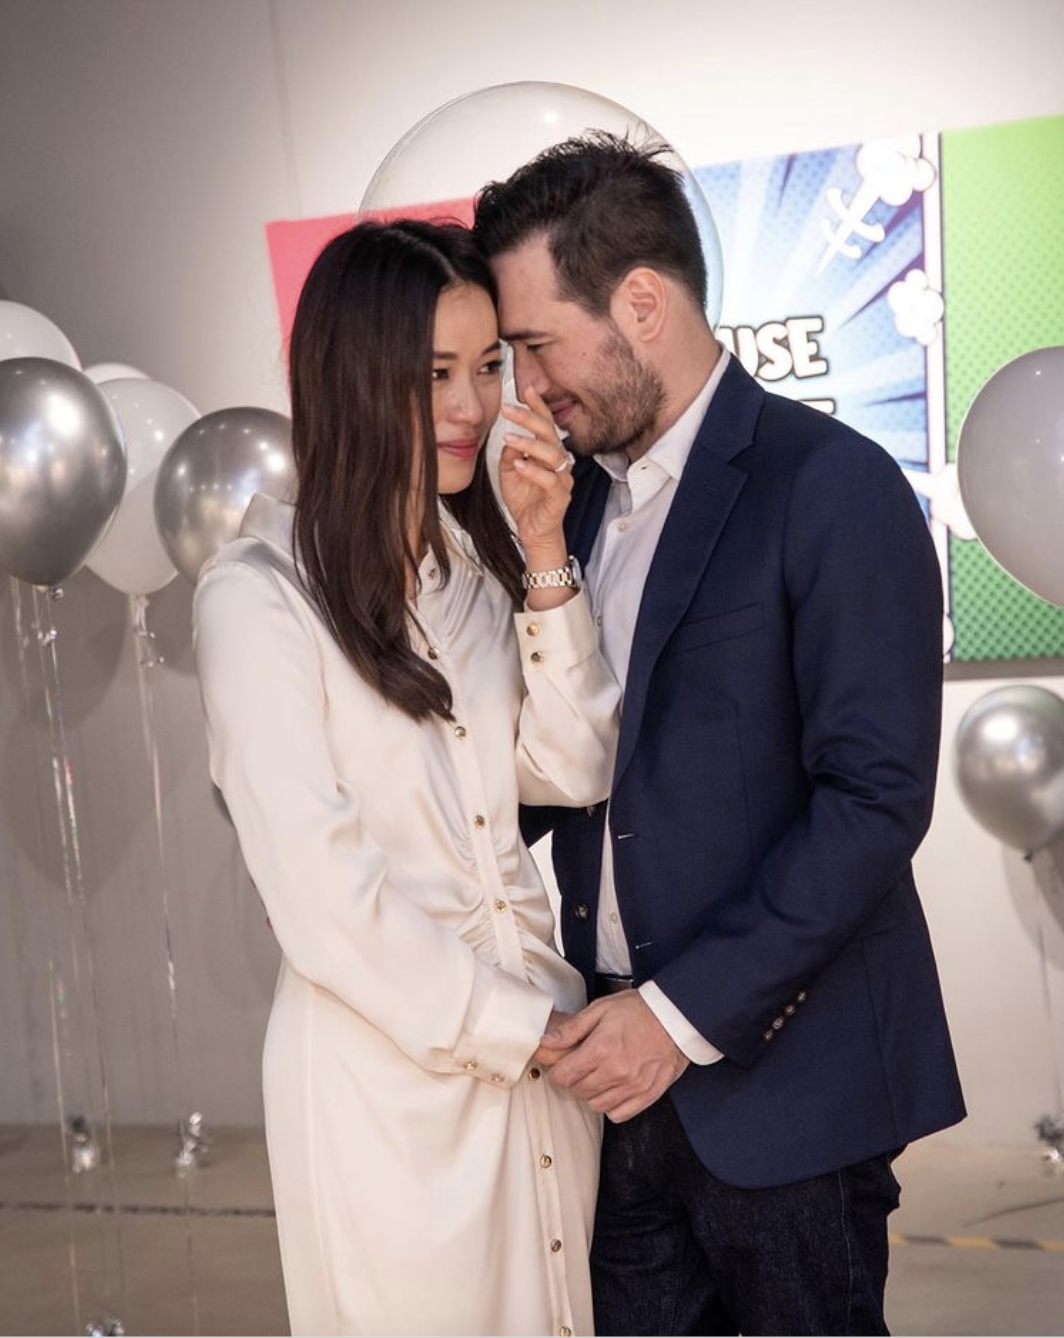 Newly engaged actress Rebecca Lim revealed her fiancé's face in an Instagram post on 21 November 2021.